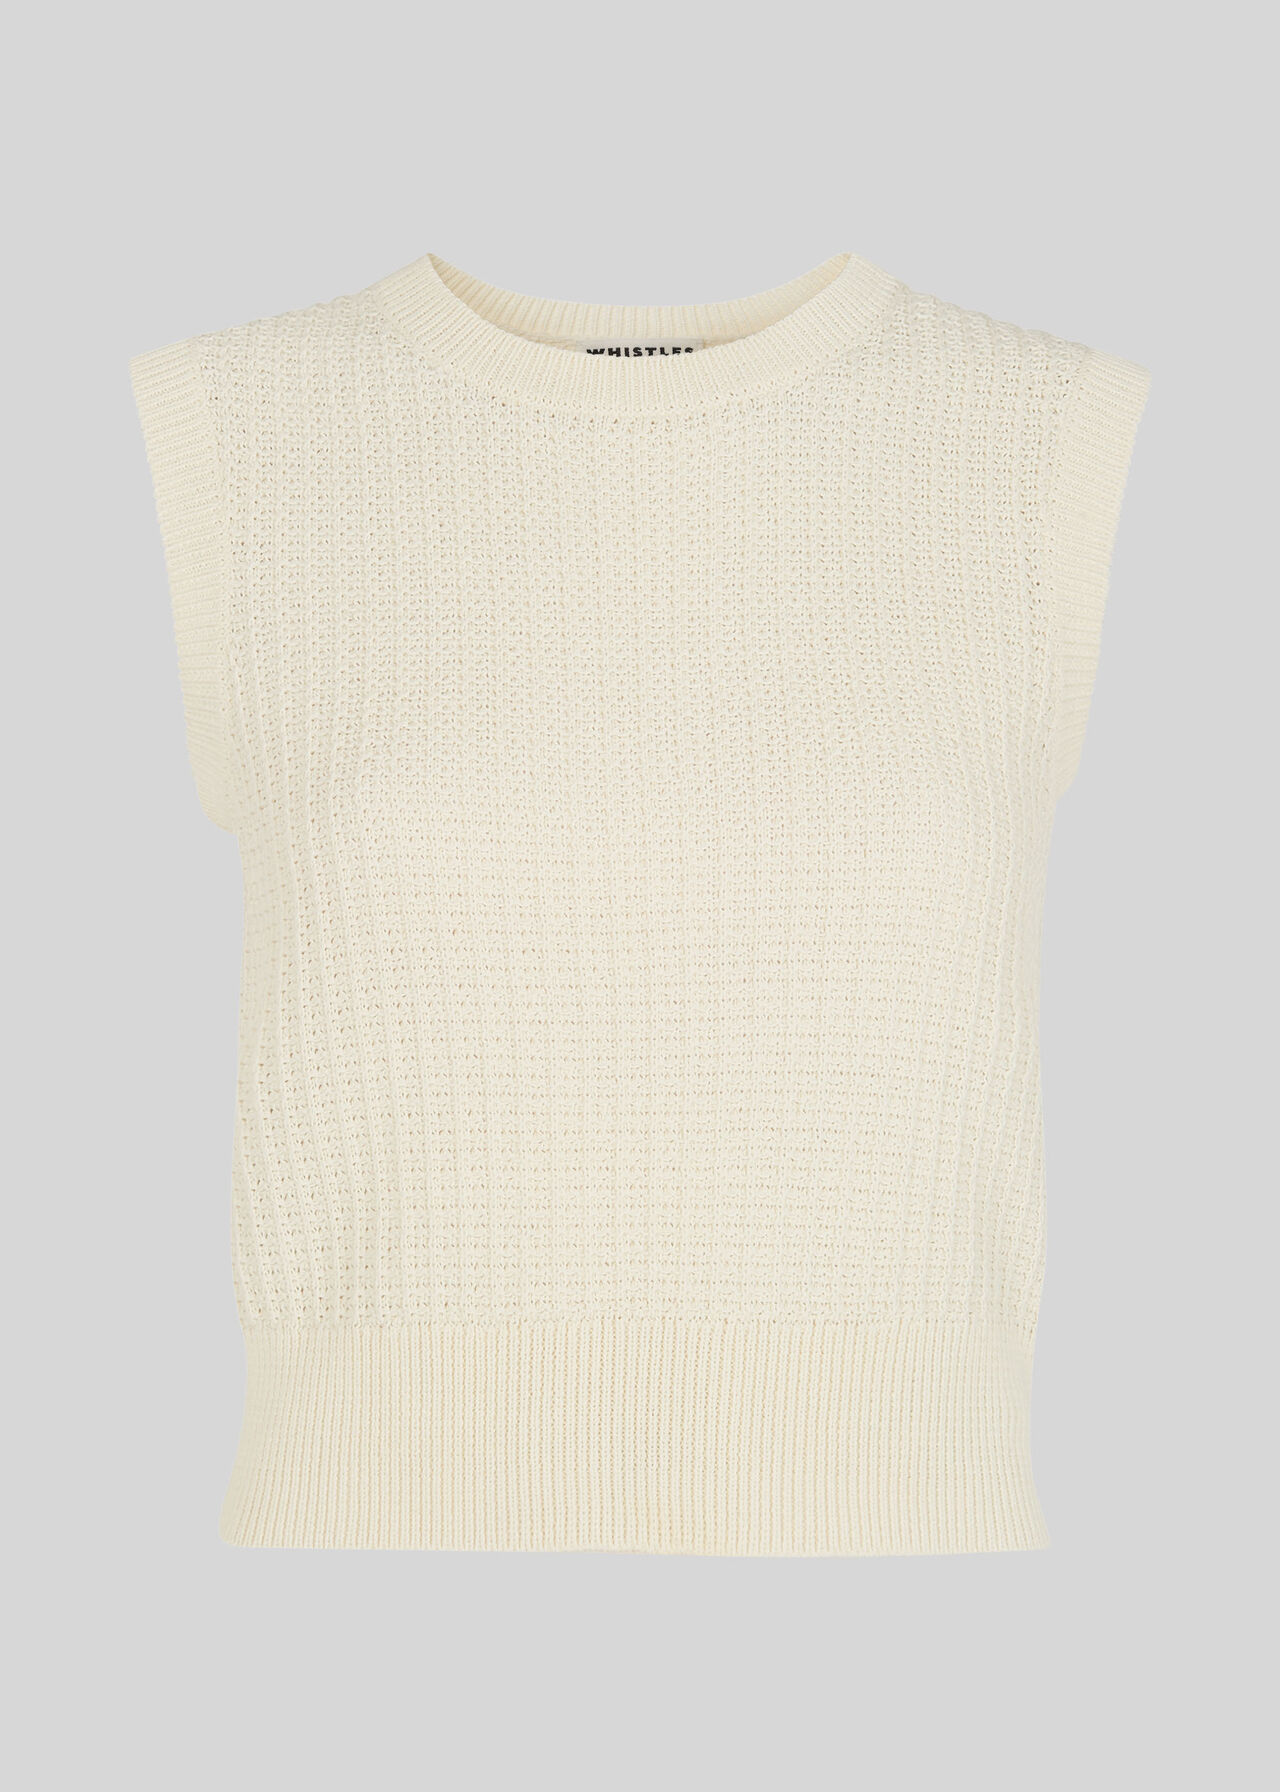 Waffle Knitted Top Ivory/Multi